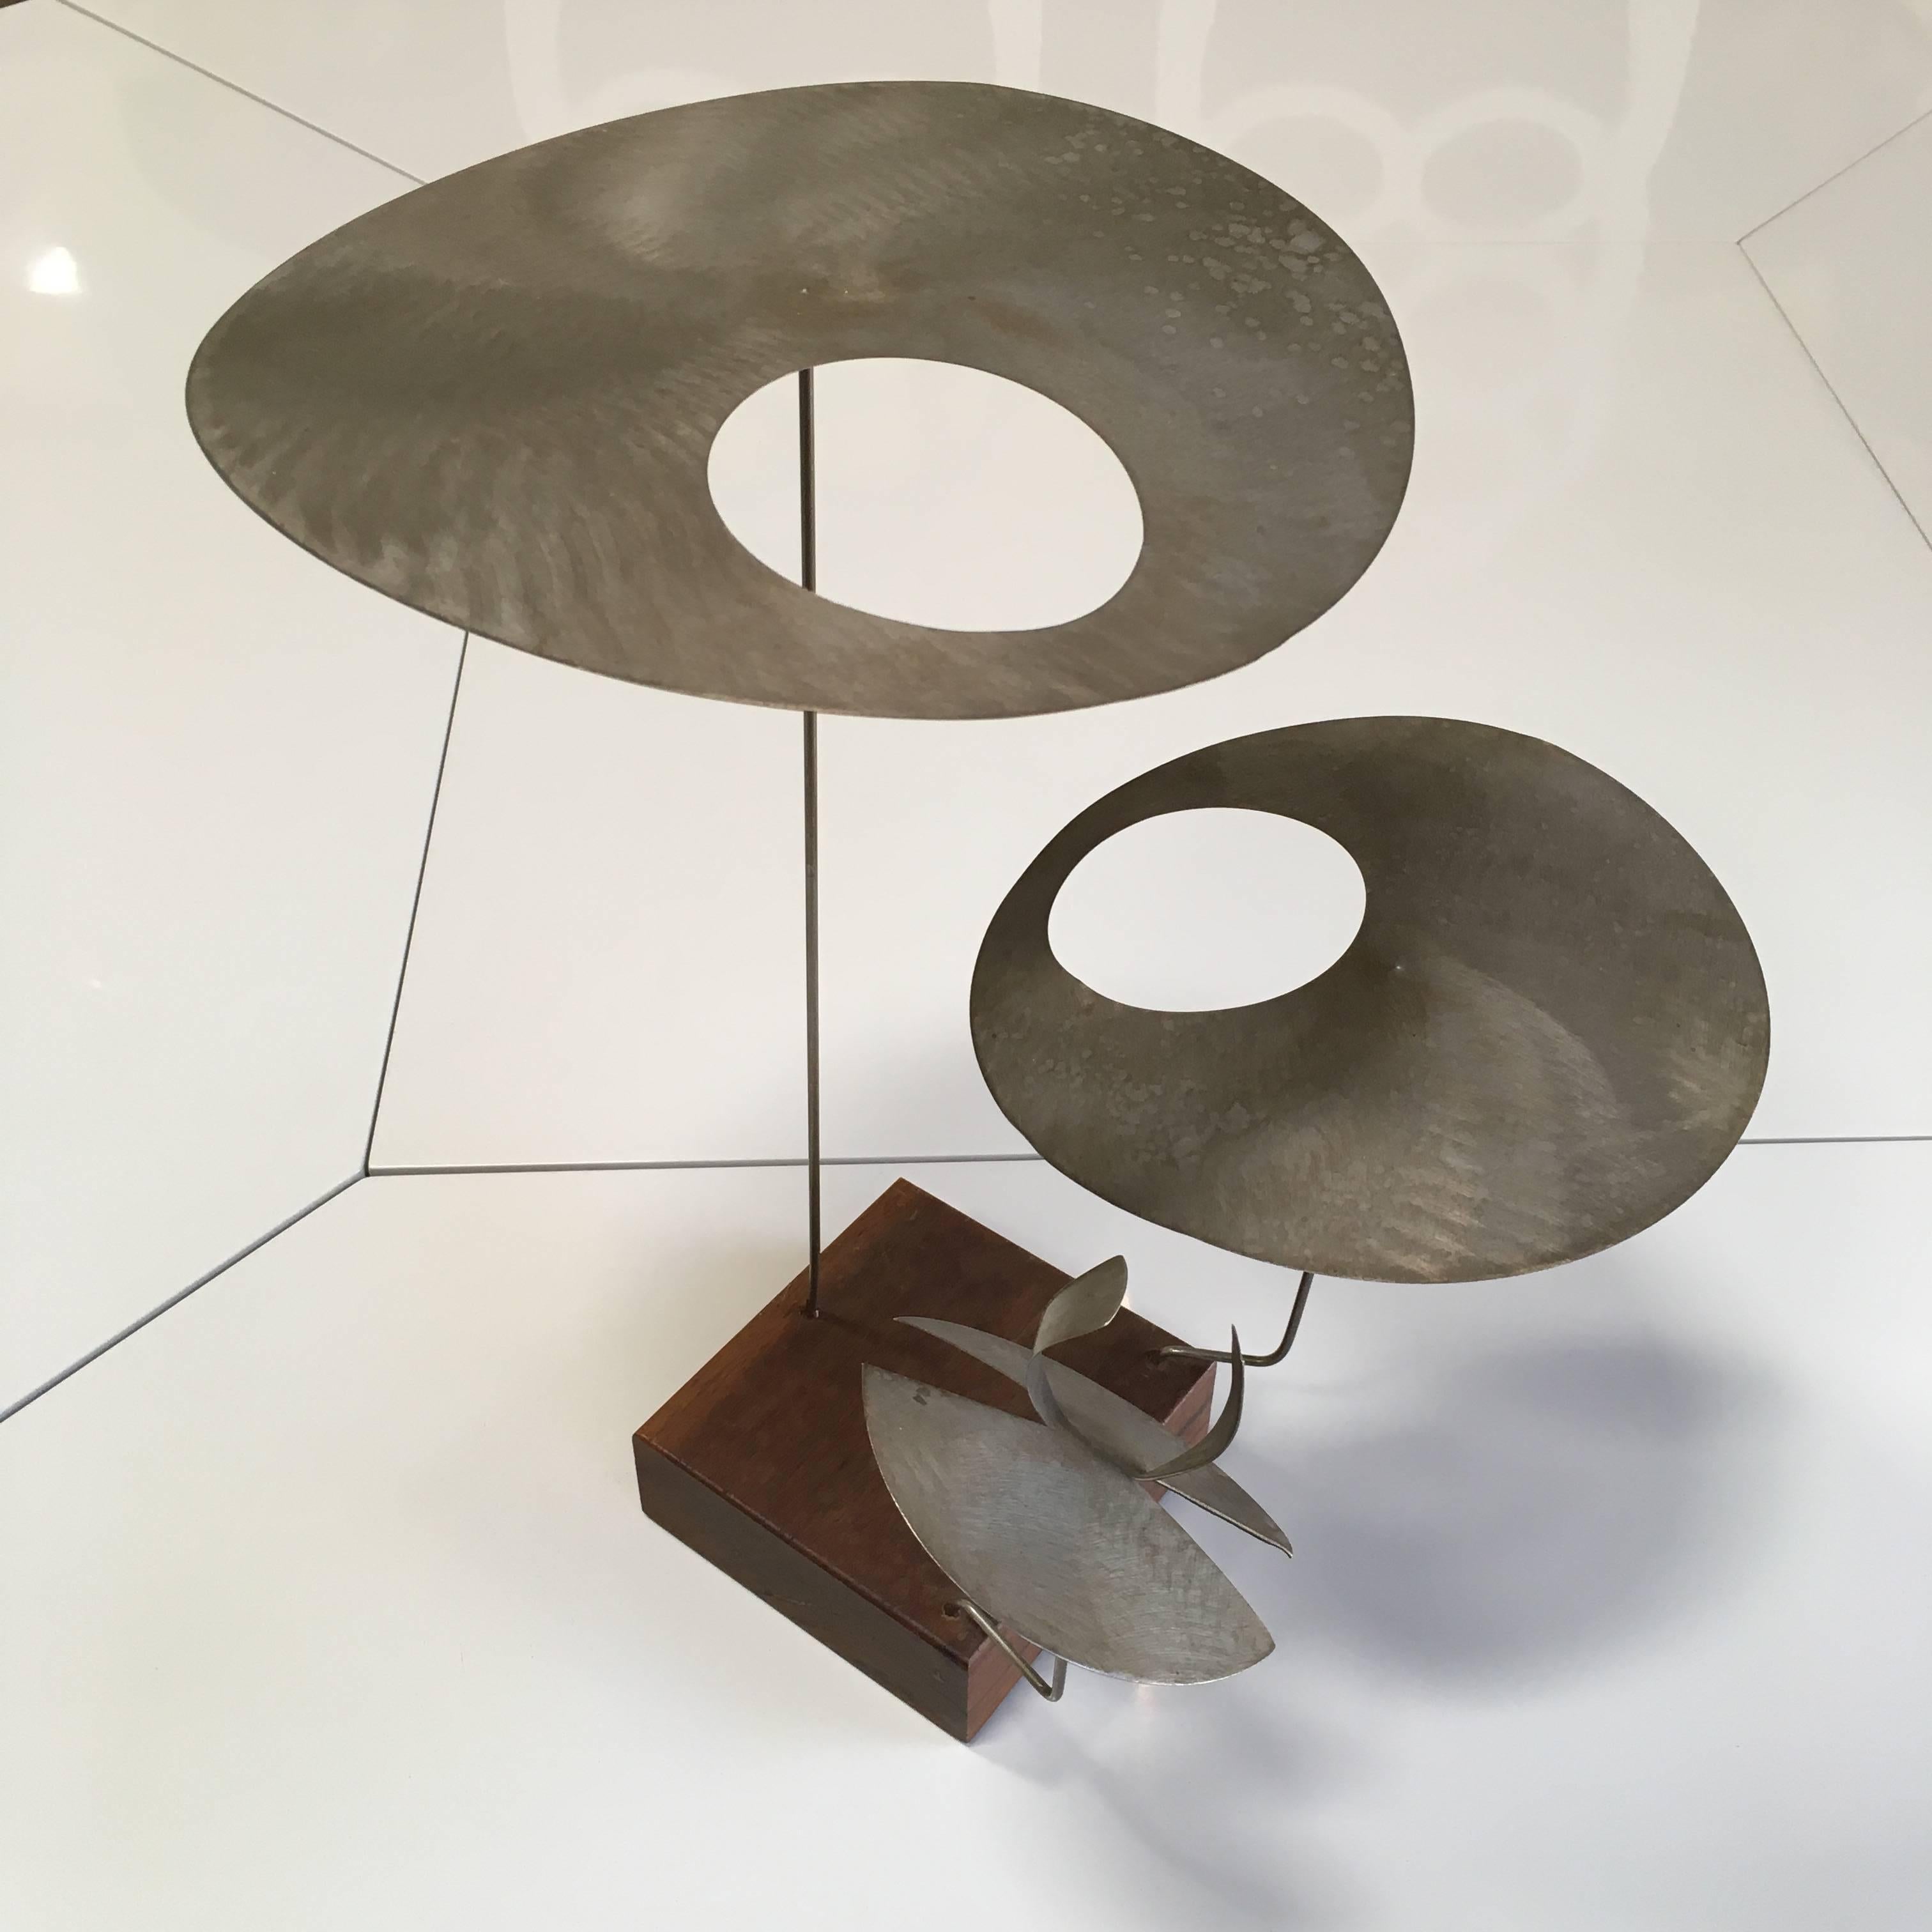 A fascinating kinetic sculpture. Biomorphic rotating metal discs cantilevered on metal rods and attached to square wooden base. Provenance accompanies.